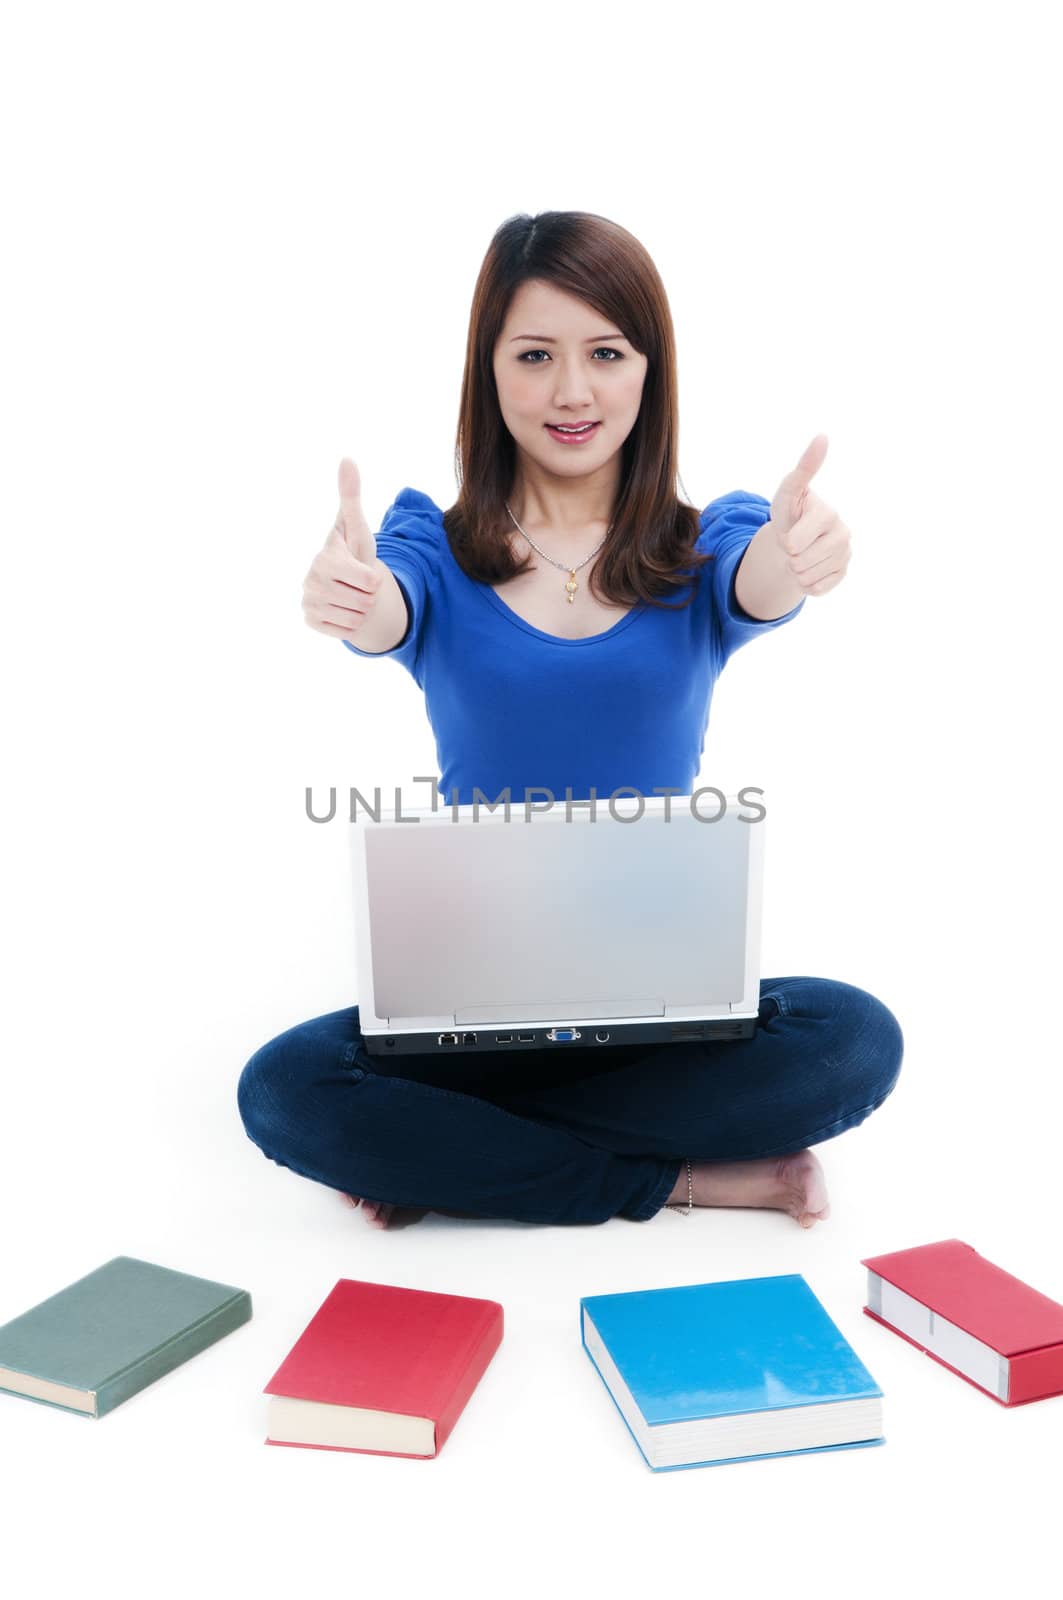 Portrait of a cute student with laptop and books spread around, giving thumbs up sign over white background.